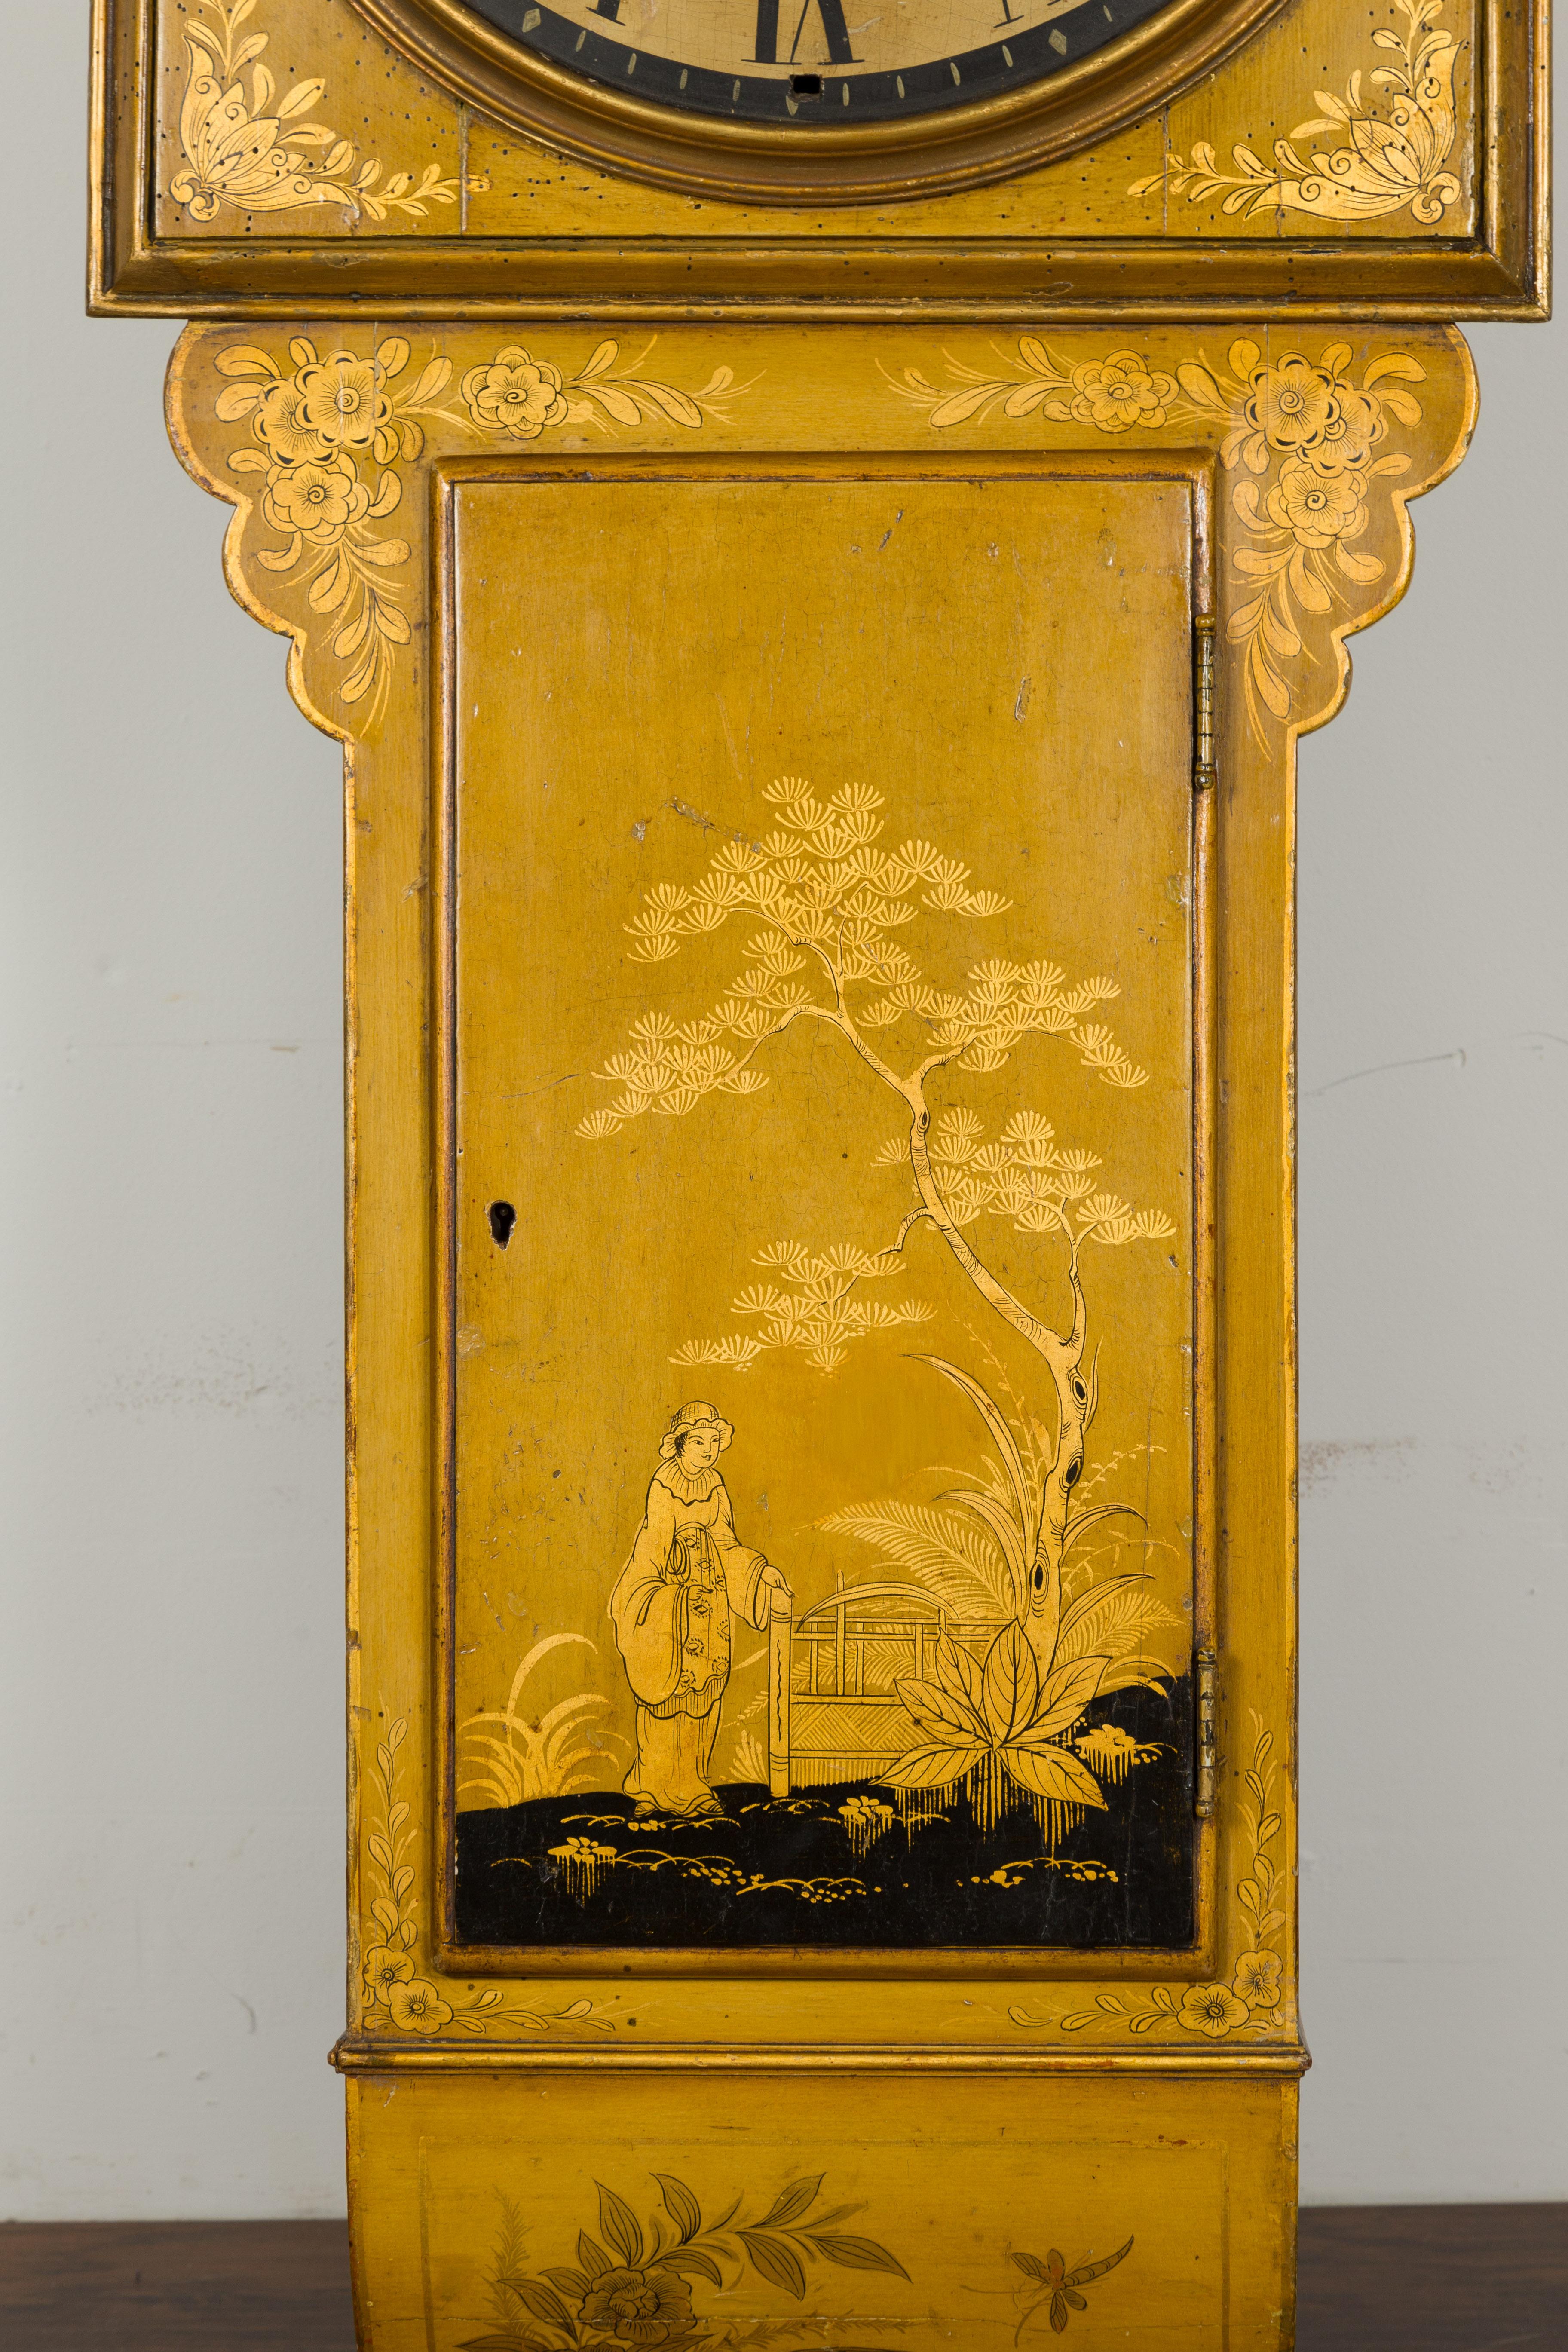 19th Century English Regency Period 1820s Golden Toned Wall Clock with Chinoiserie Décor For Sale